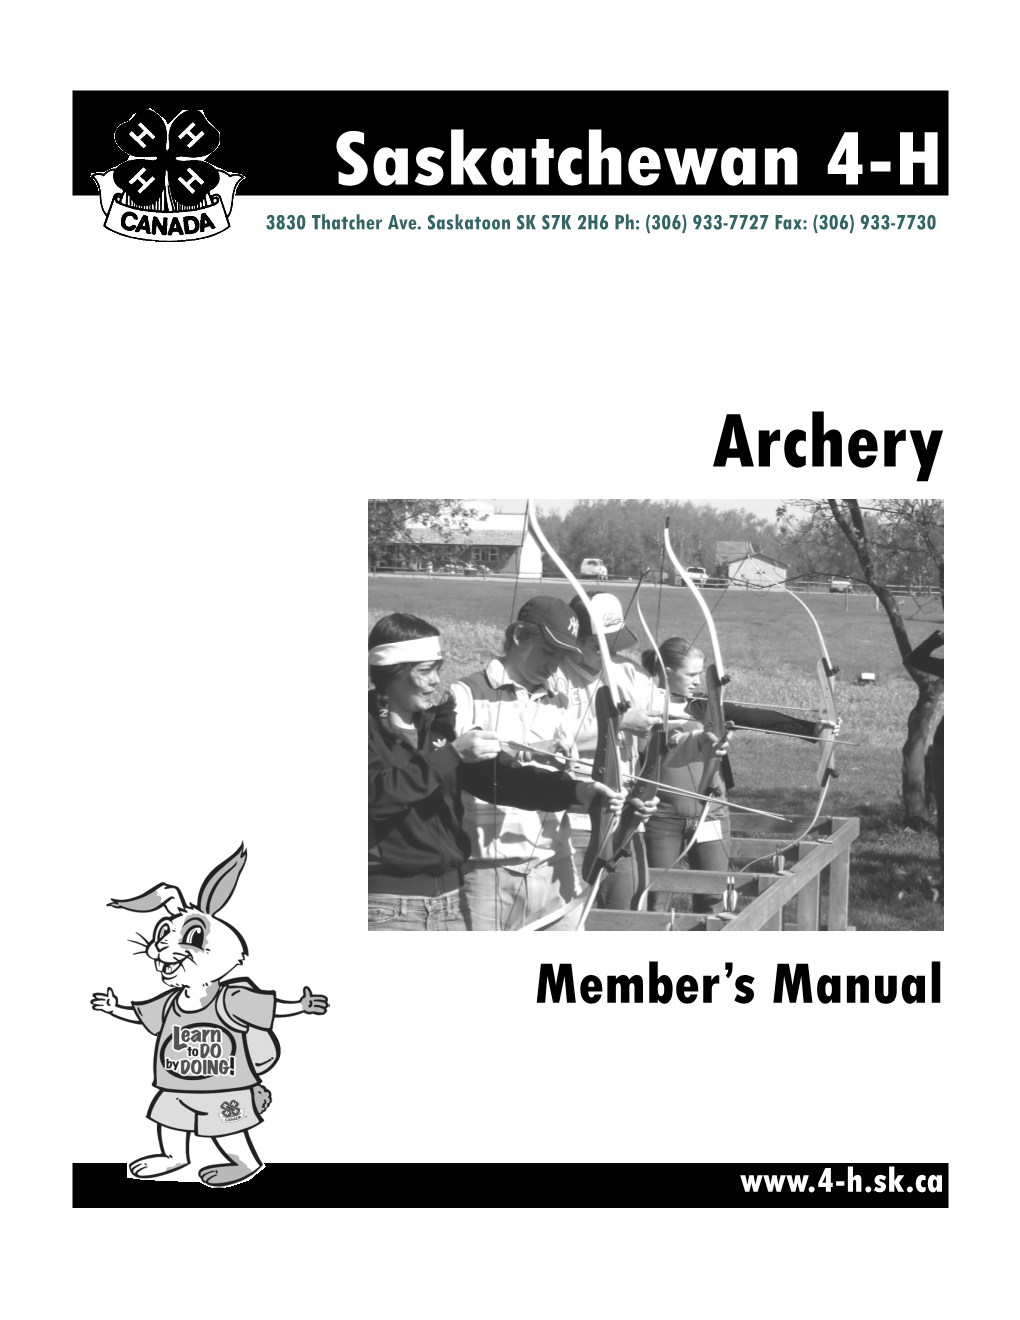 Archery Equipment 23 • Section 7 - Bow Tuning 29 • Section 8 - Target Archery Games 33